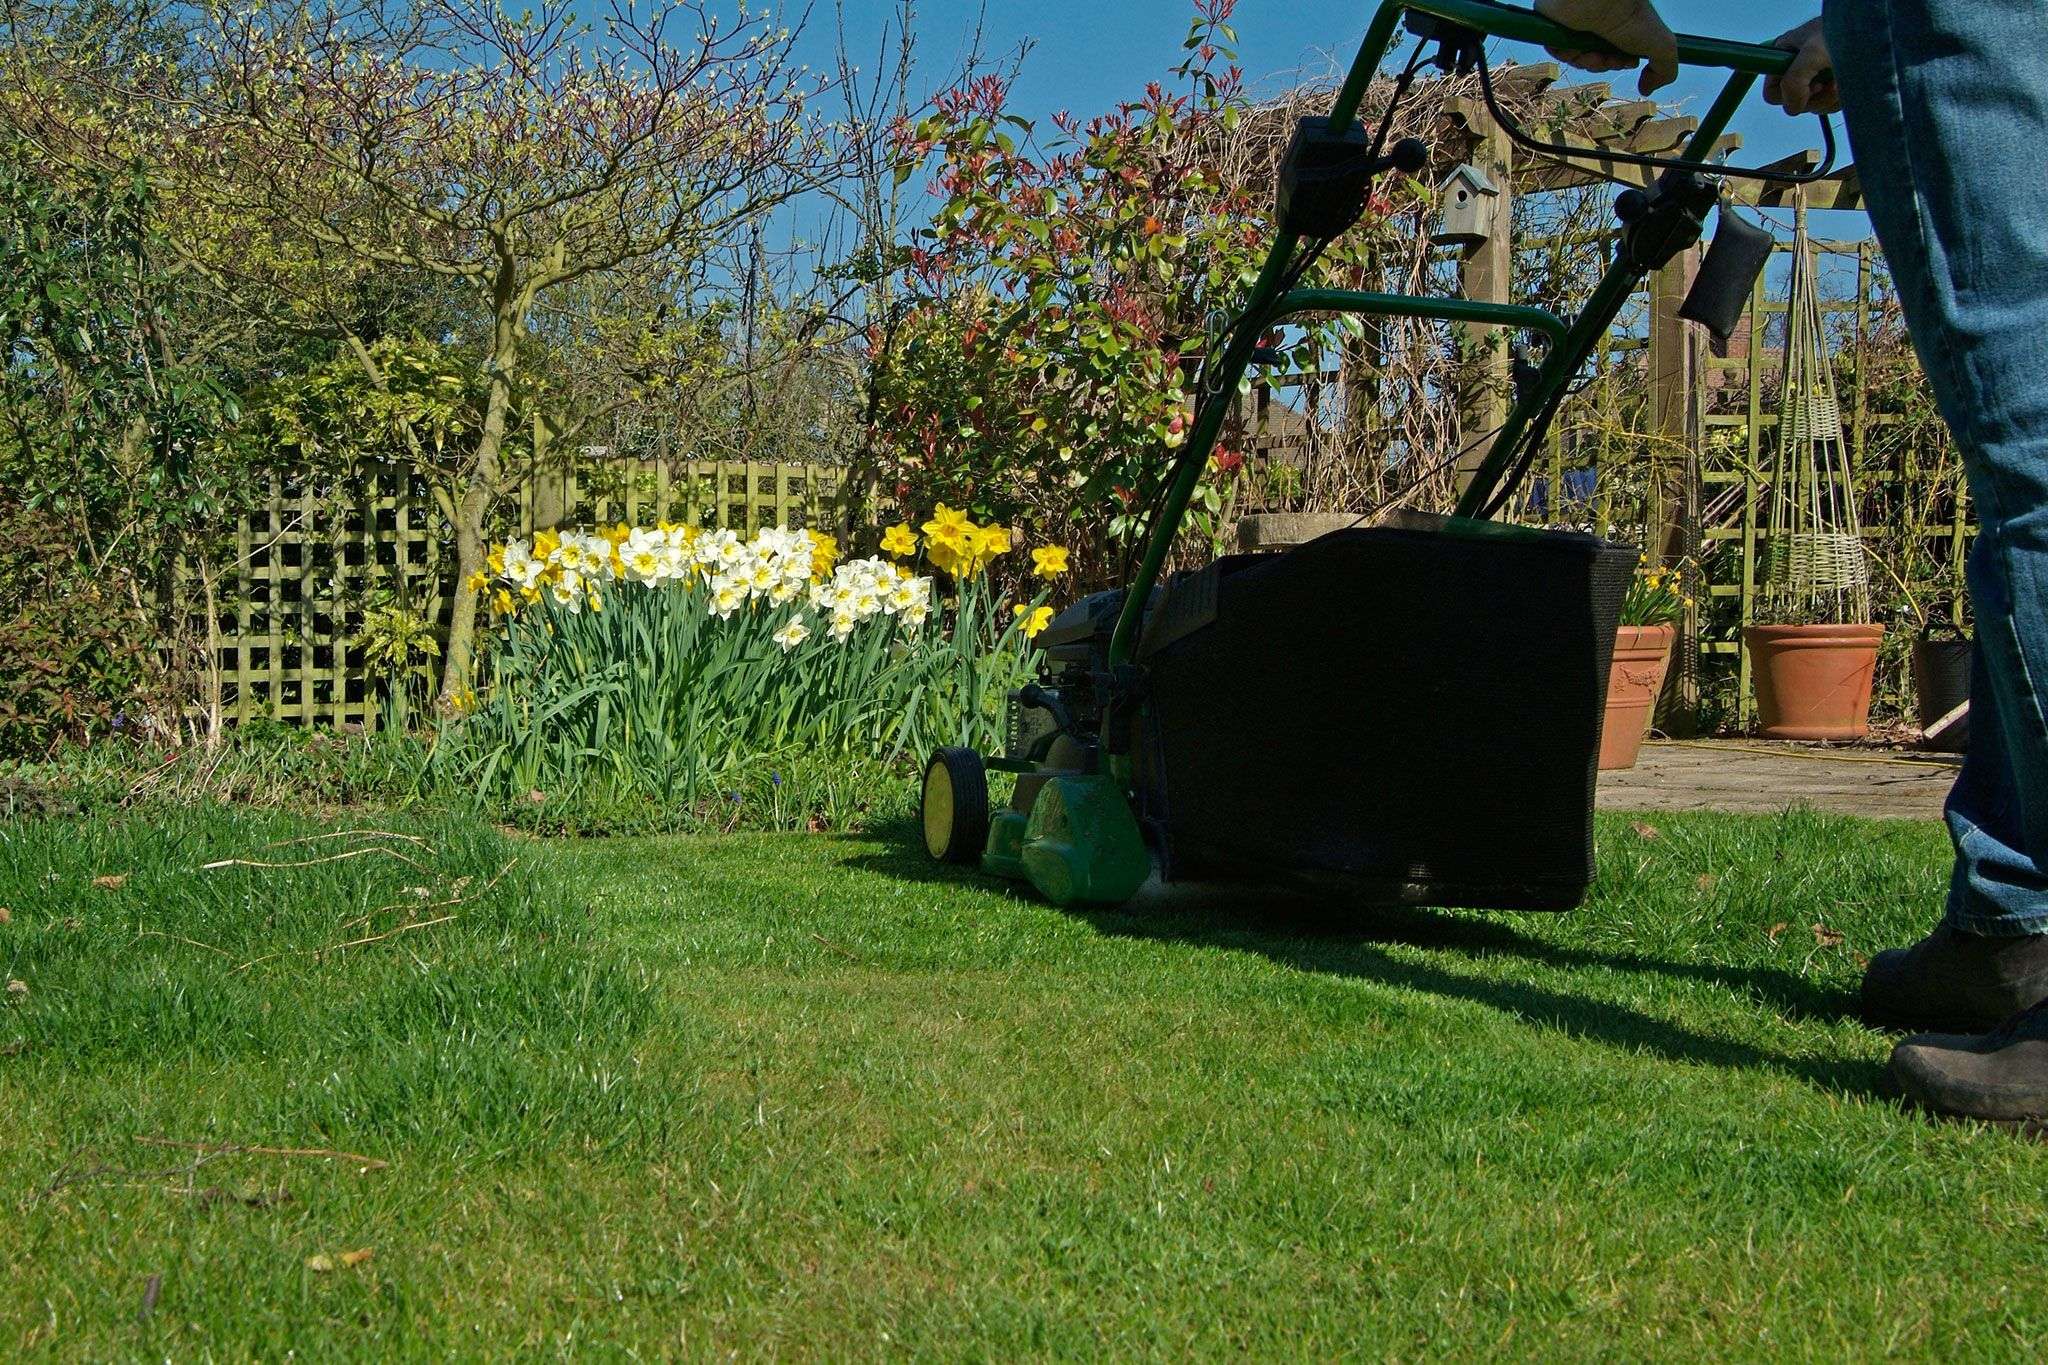 How to improve your lawn in 12 weeks